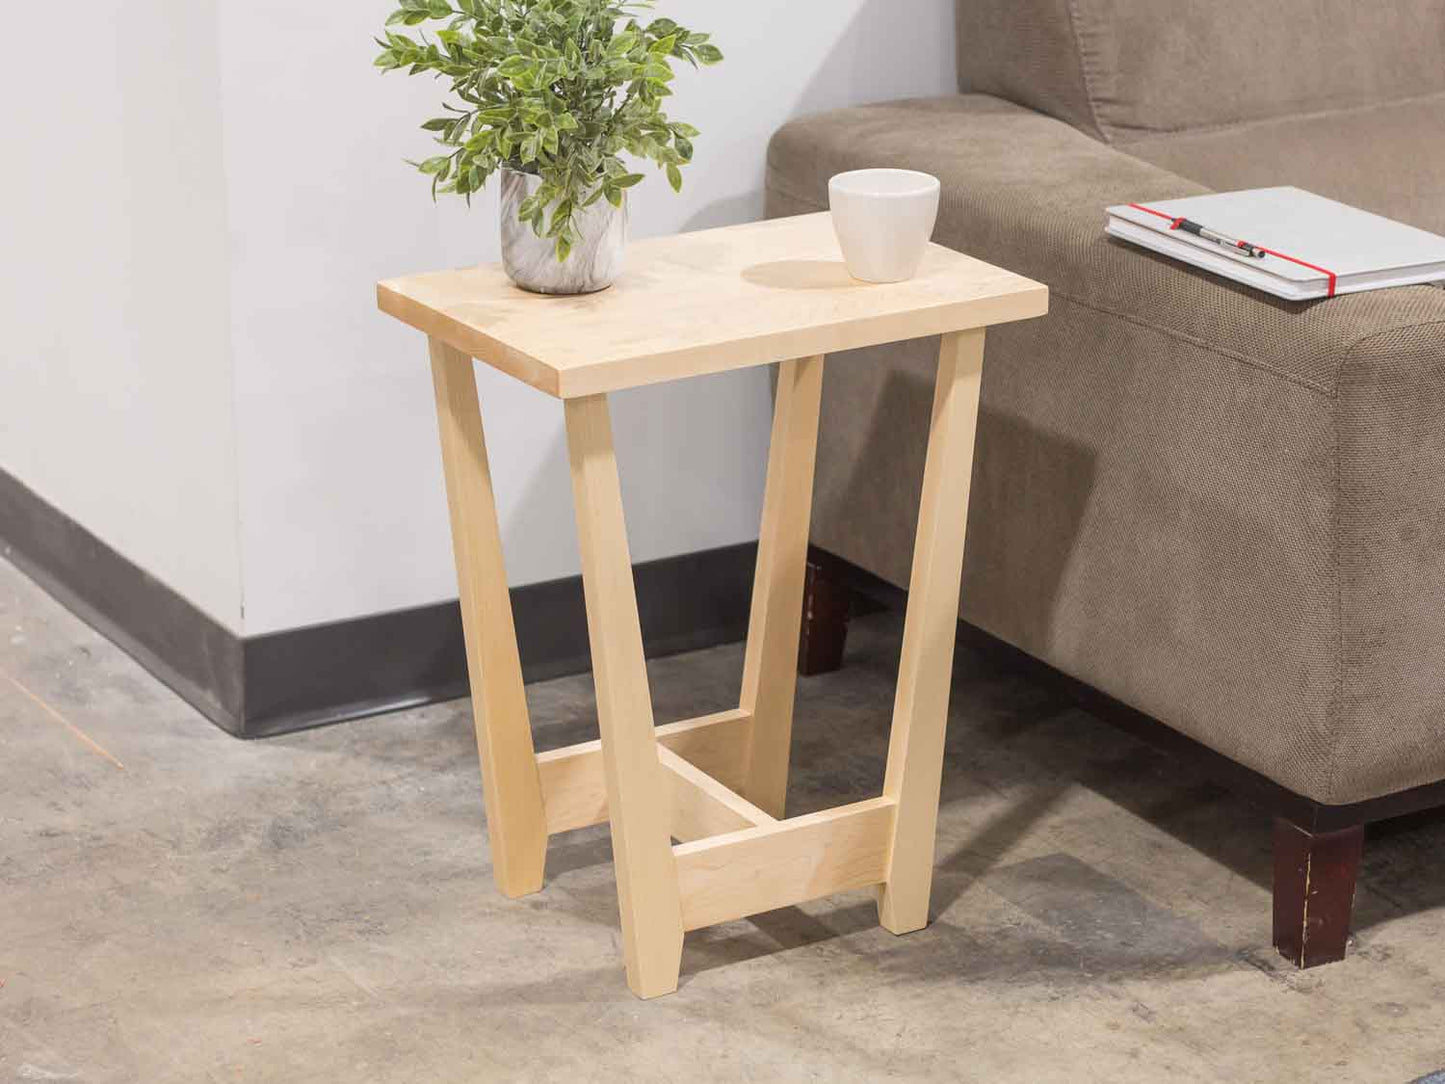 A side table placed in a living room with a plant and coffee mug sat on the table top. The side table is made from light maple hardwood and is crafted in Scandinavian minimalist modern design.